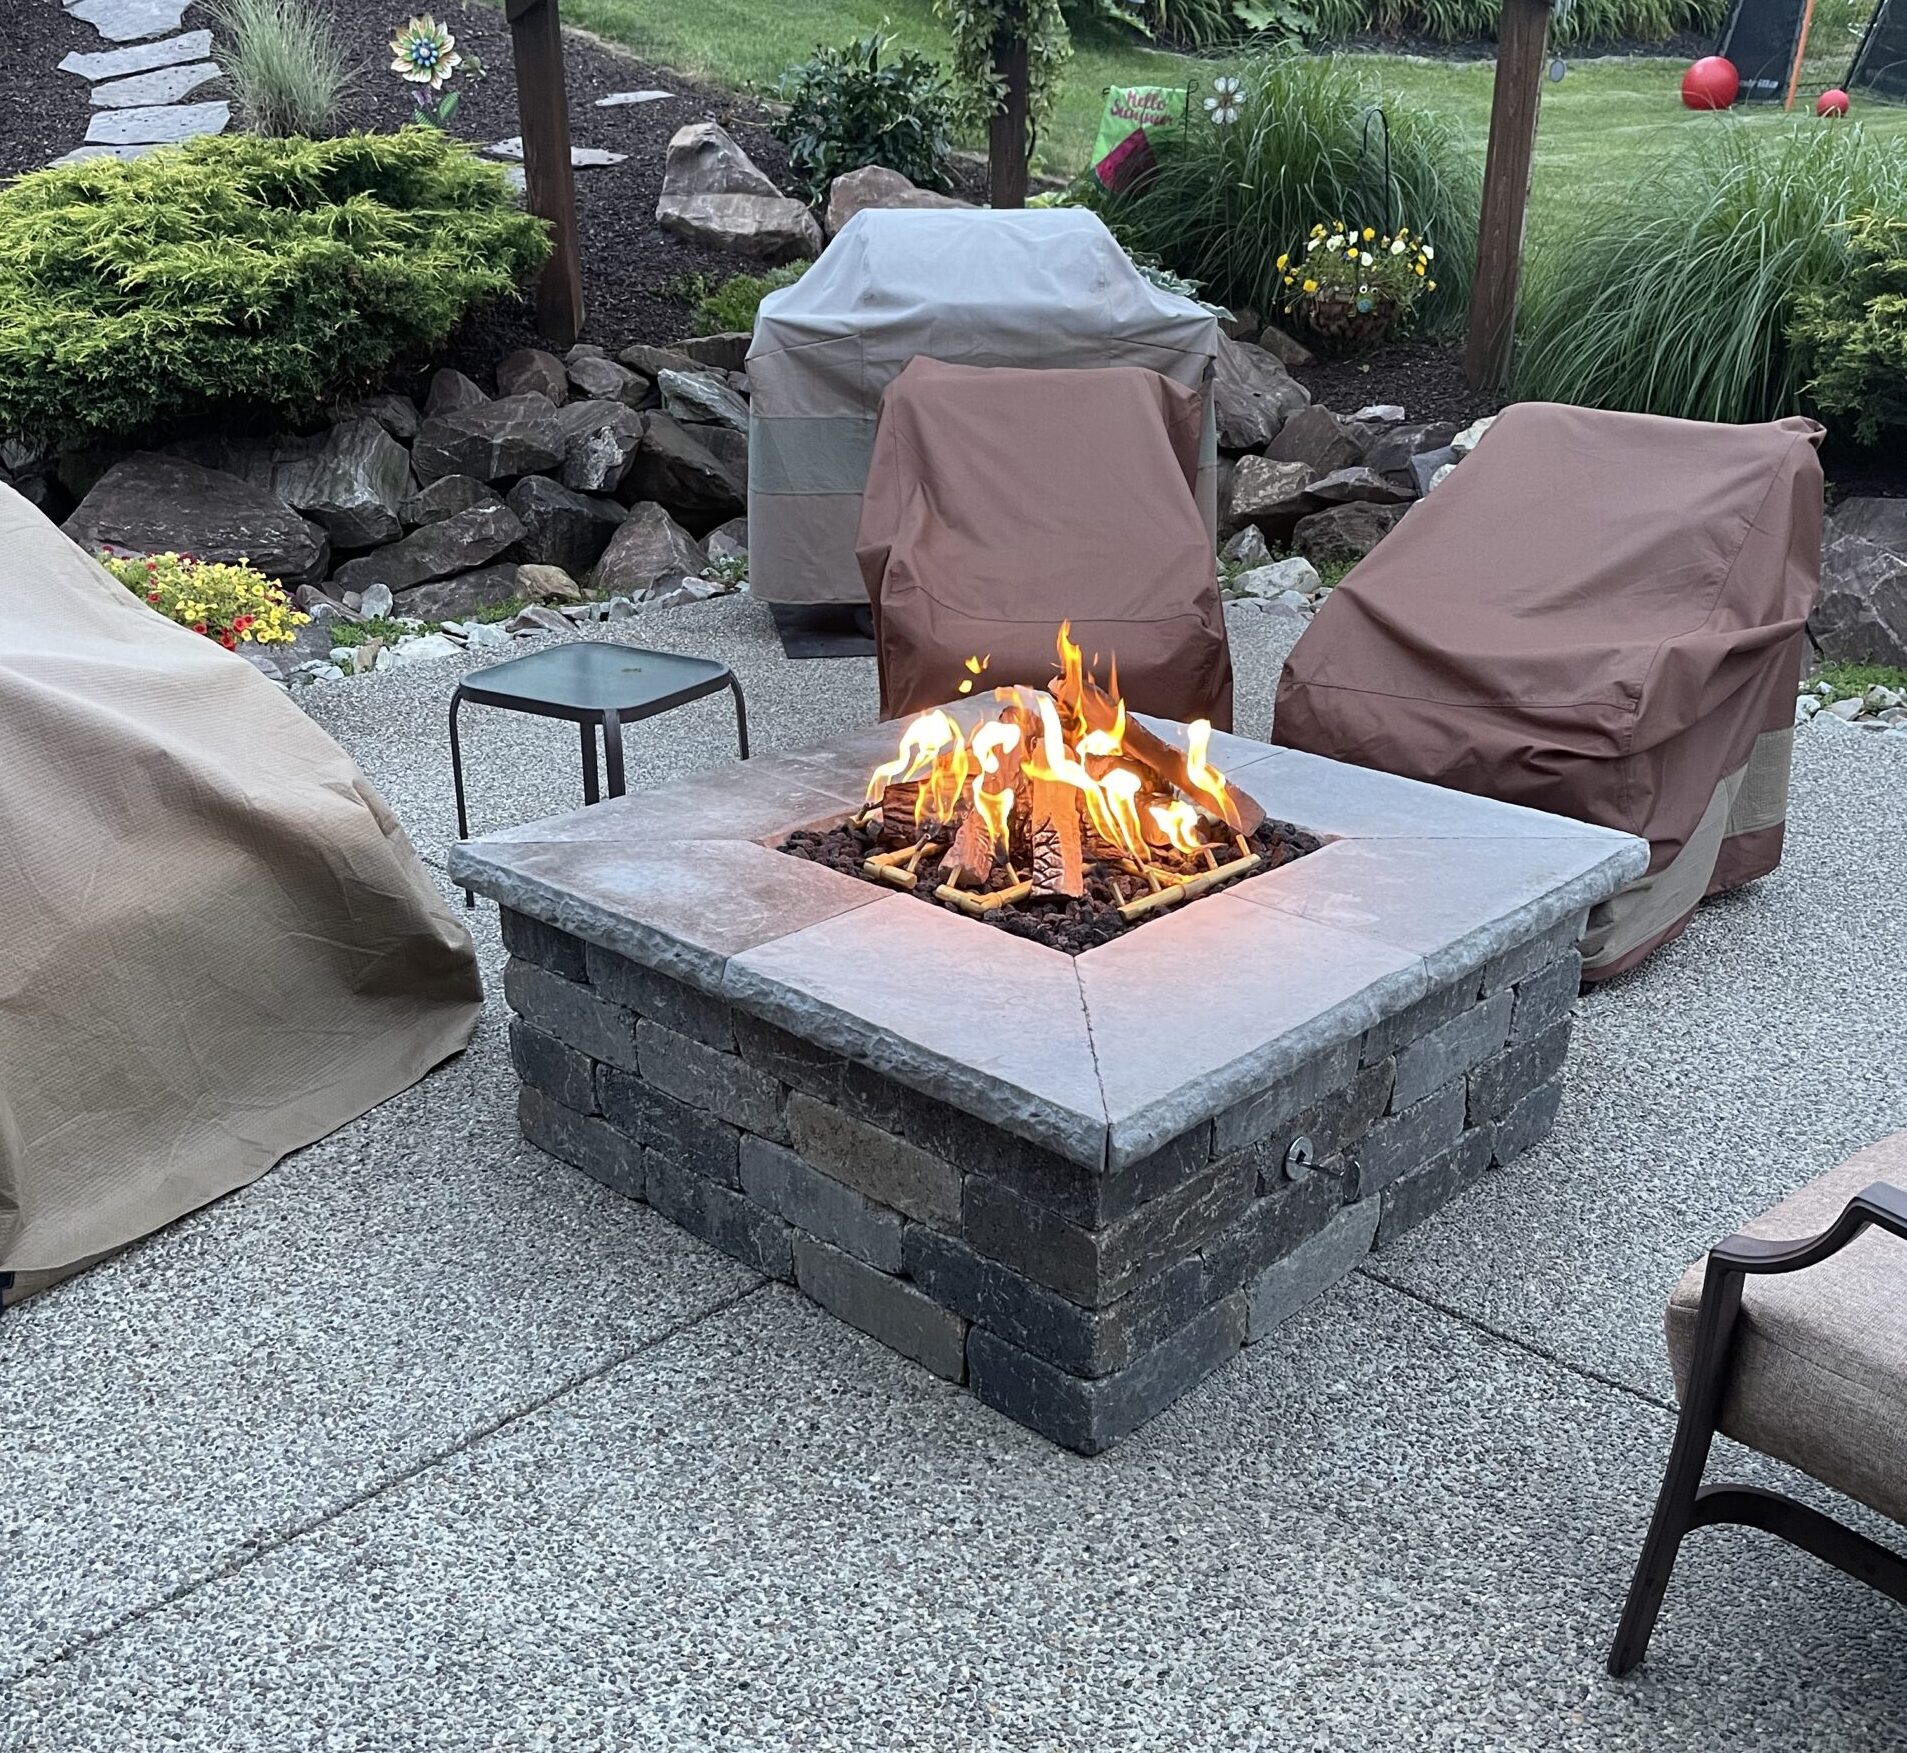 Pittsburgh Steel City Serenity: Hardscapes and Fire Pits for Stress-Free Living